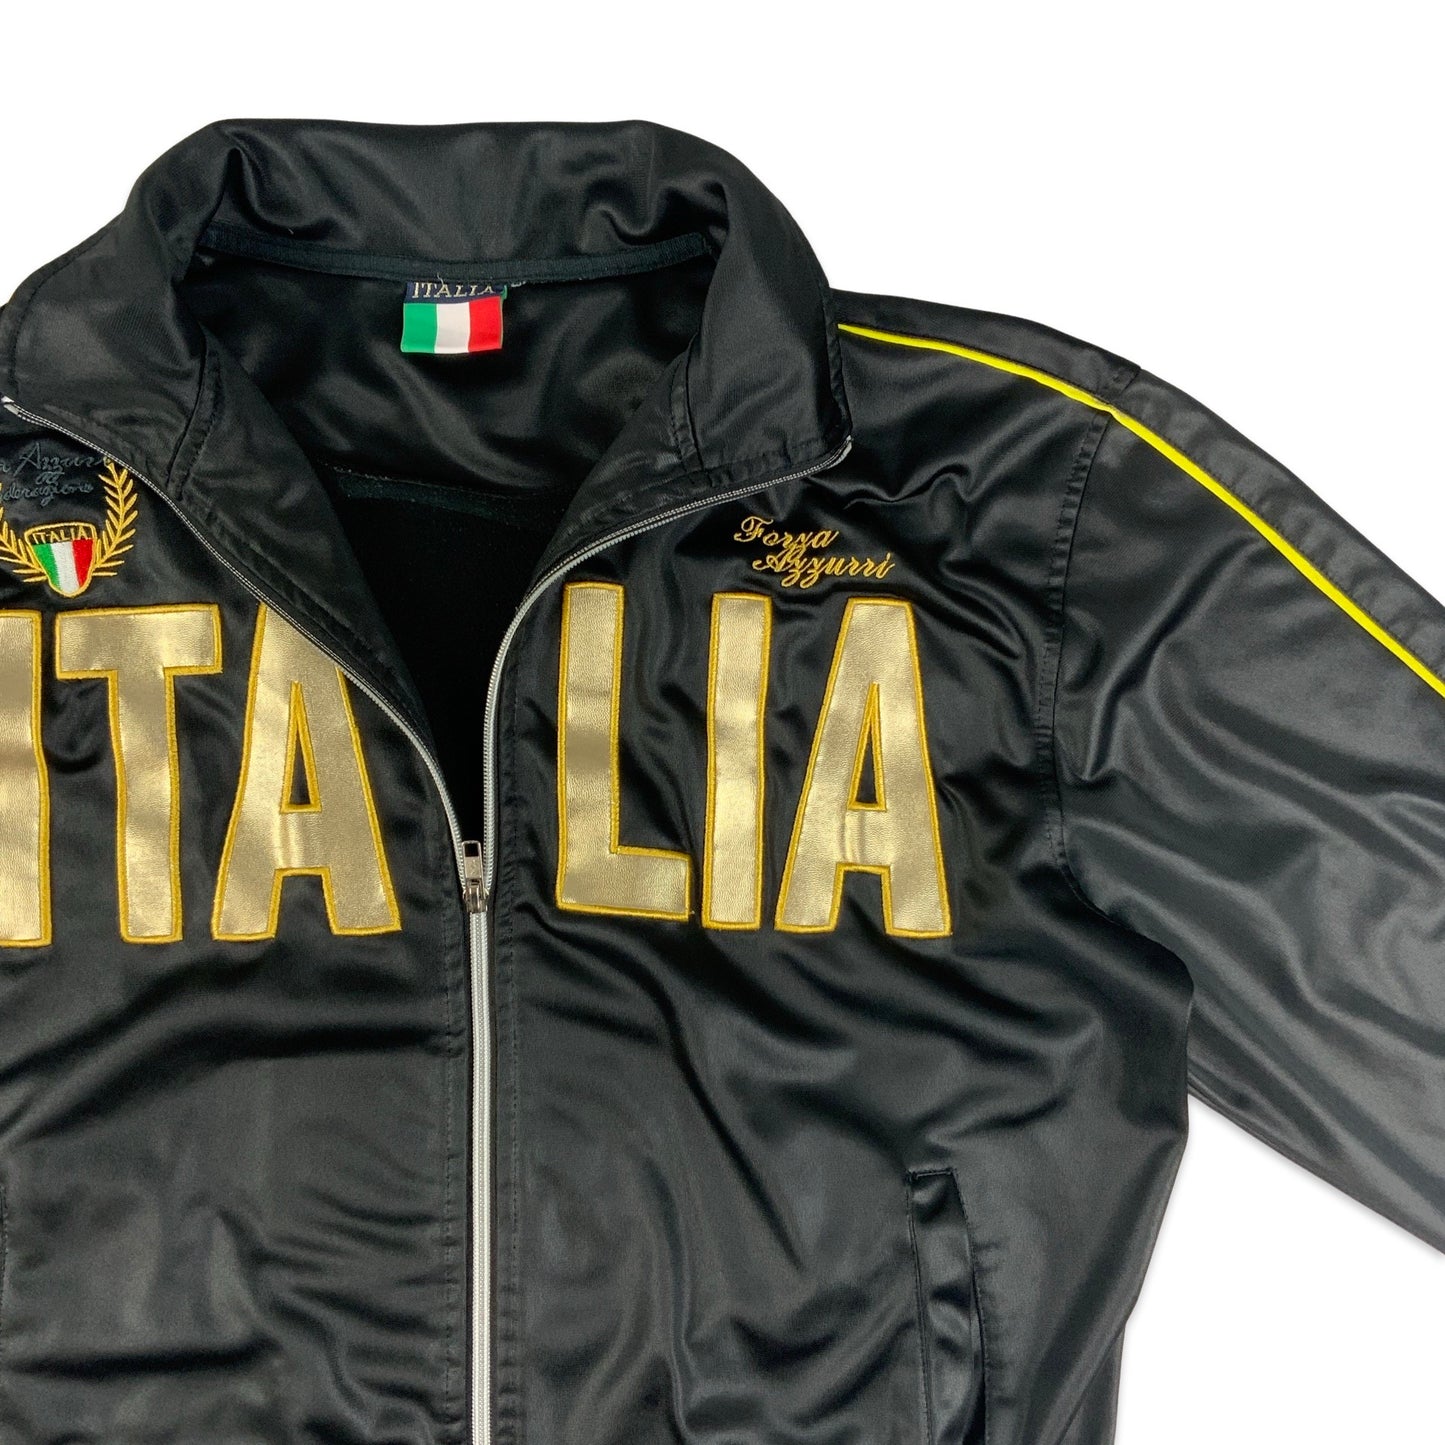 00s "Italia" Spell Out Black Track Zip-up XL XXL